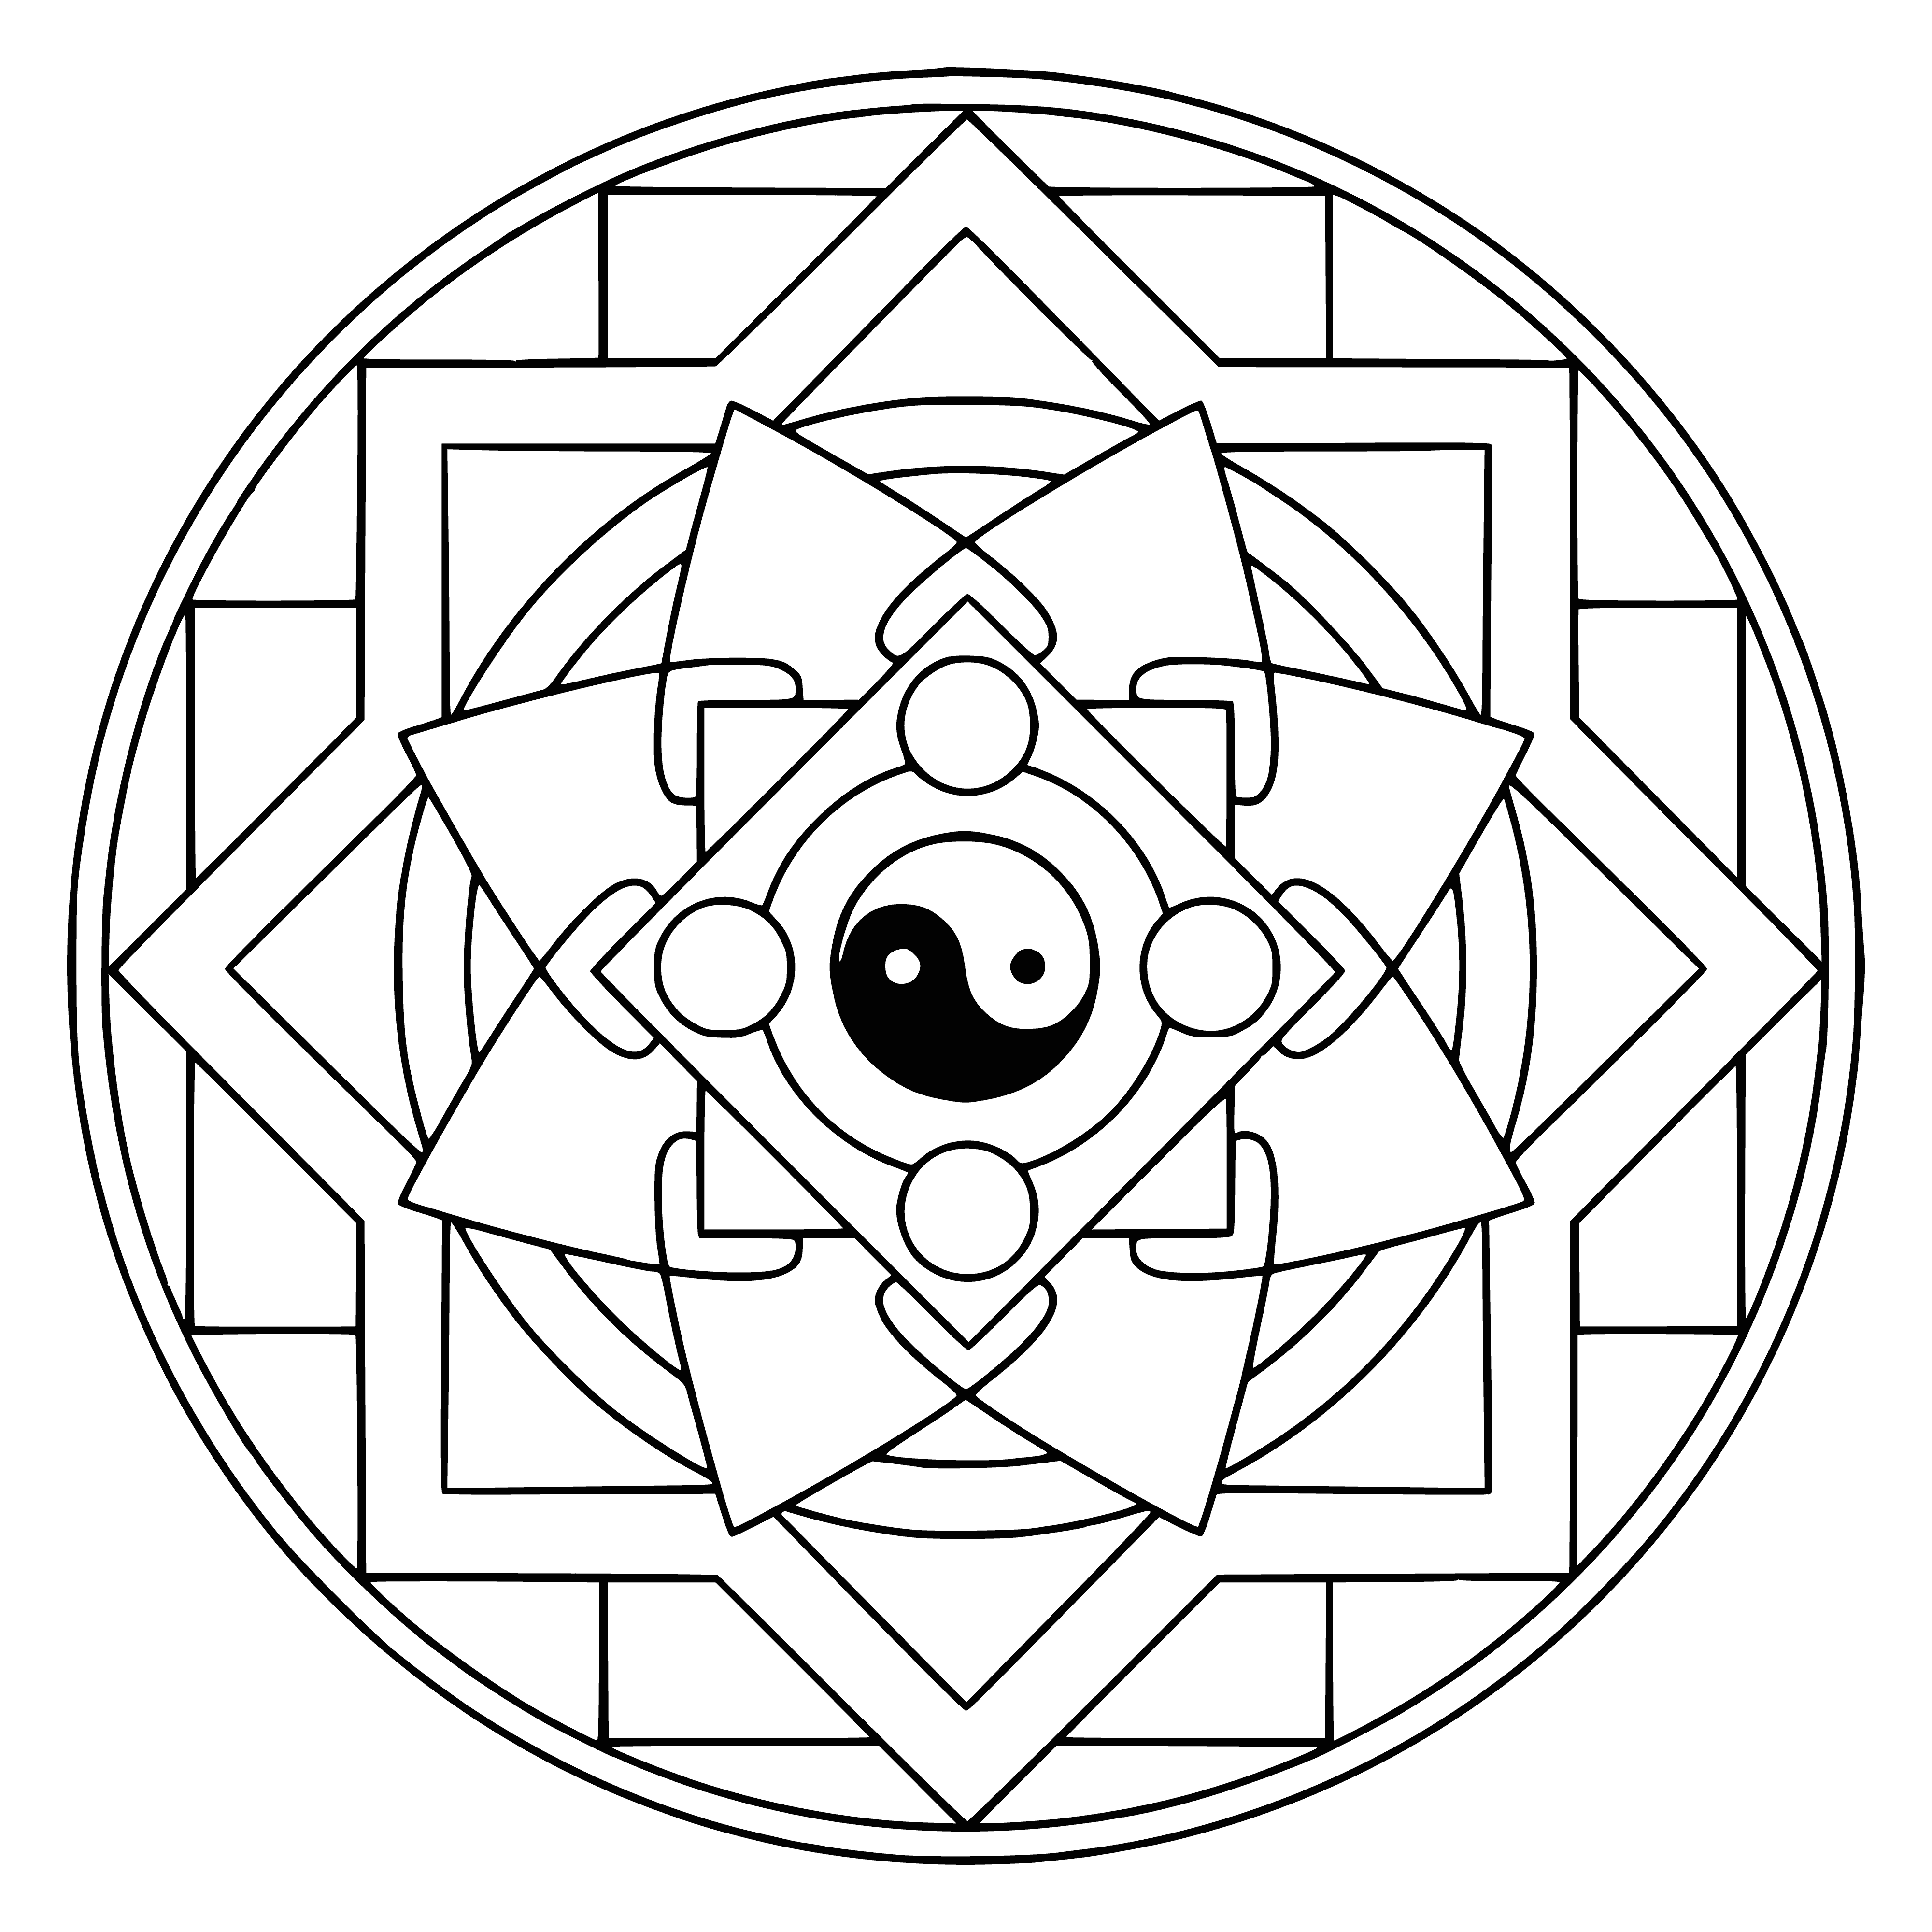 coloring page: Colourful yin yang mandala w/ four quadrants separated by cross & surrounded by a circle.